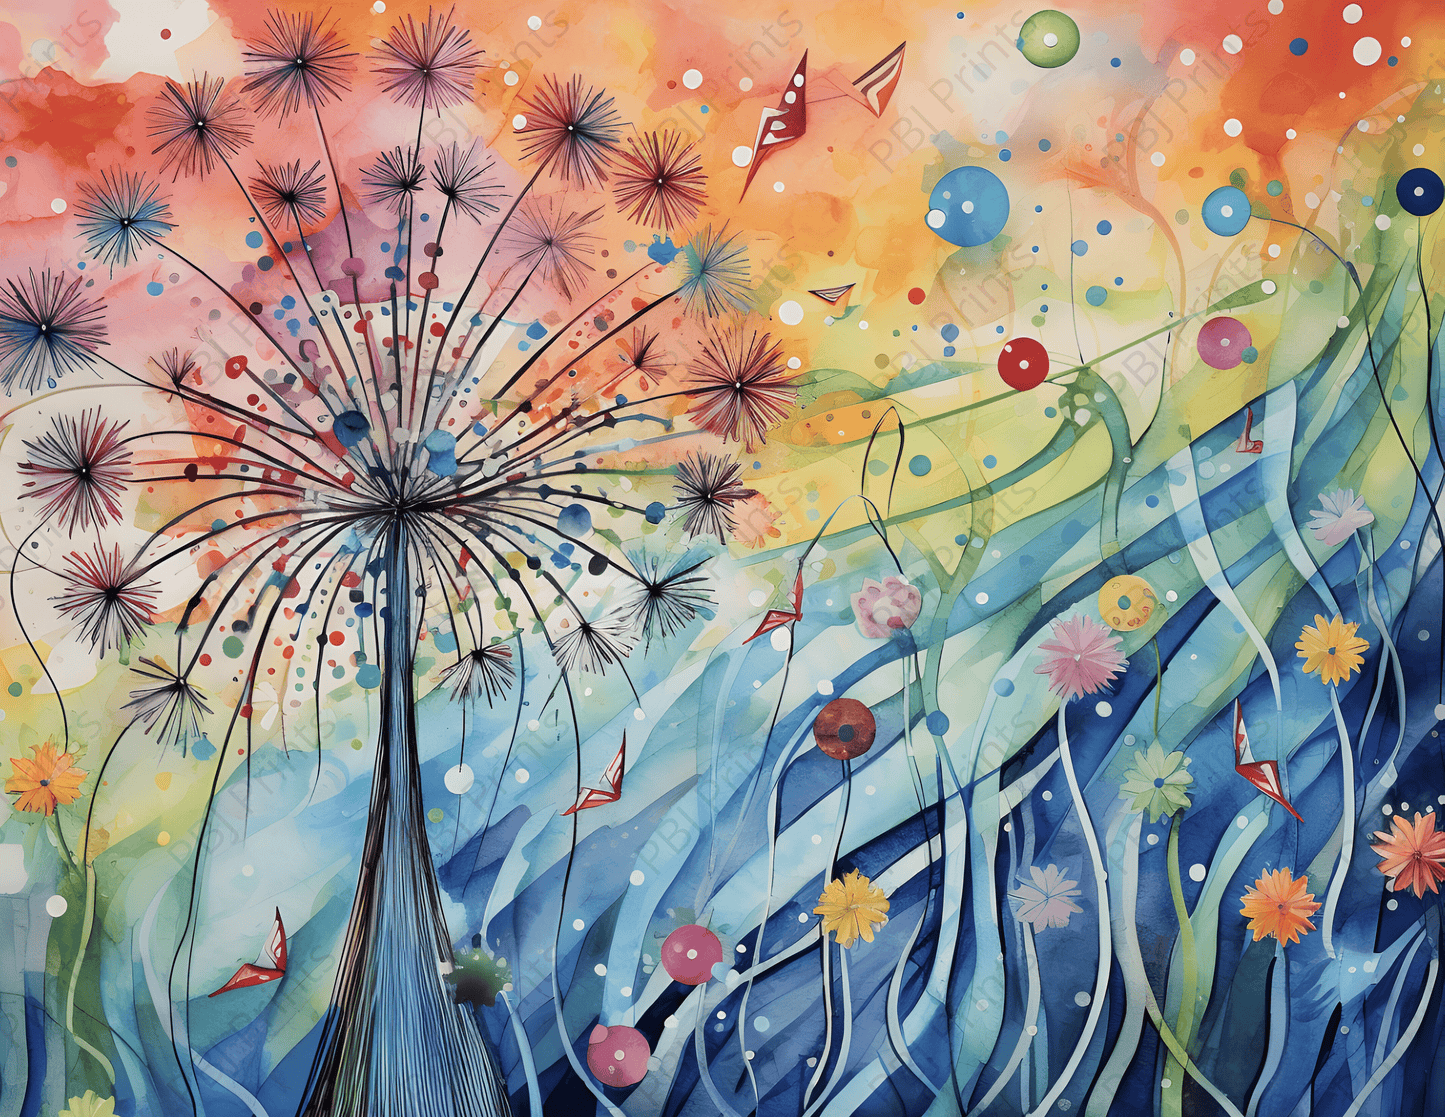 Dandelion Celebration the 4th - Artist by 2chattychicks teaching eclectic creations - 